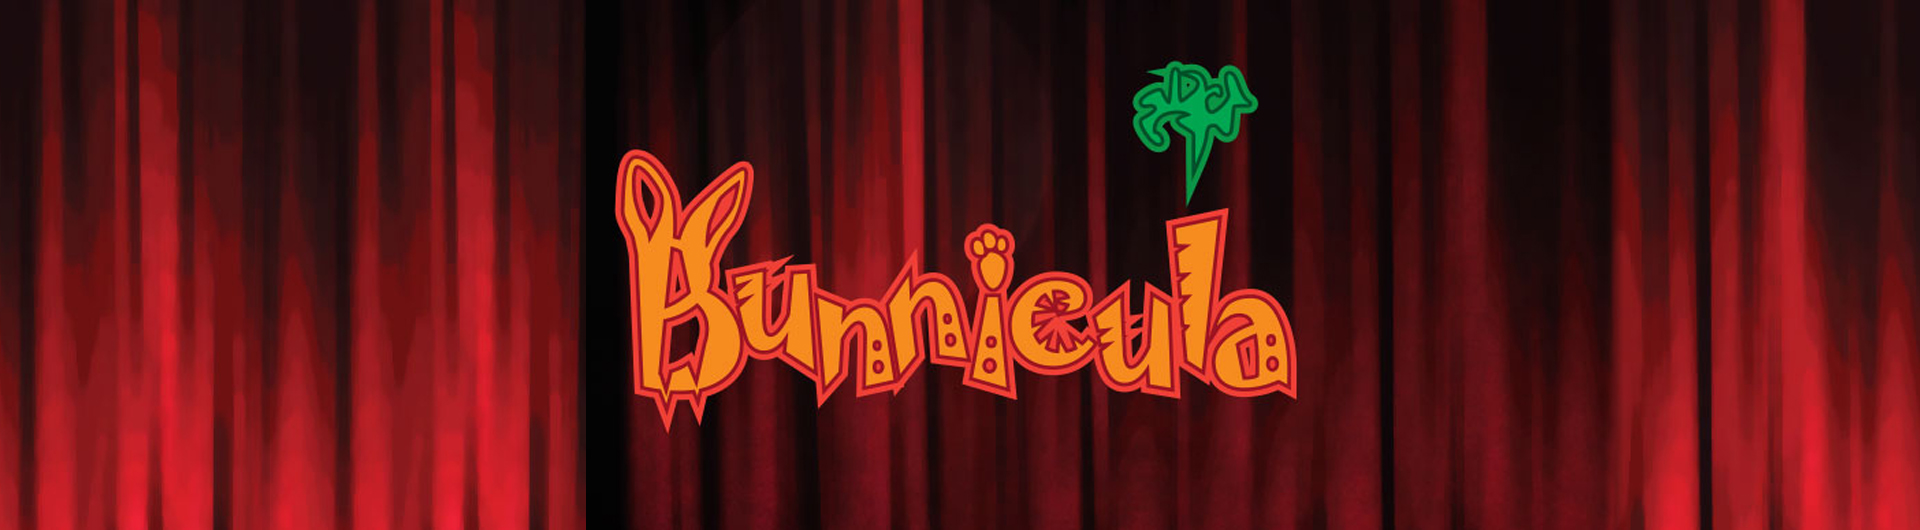 Bunnicula title on theatre curtain background